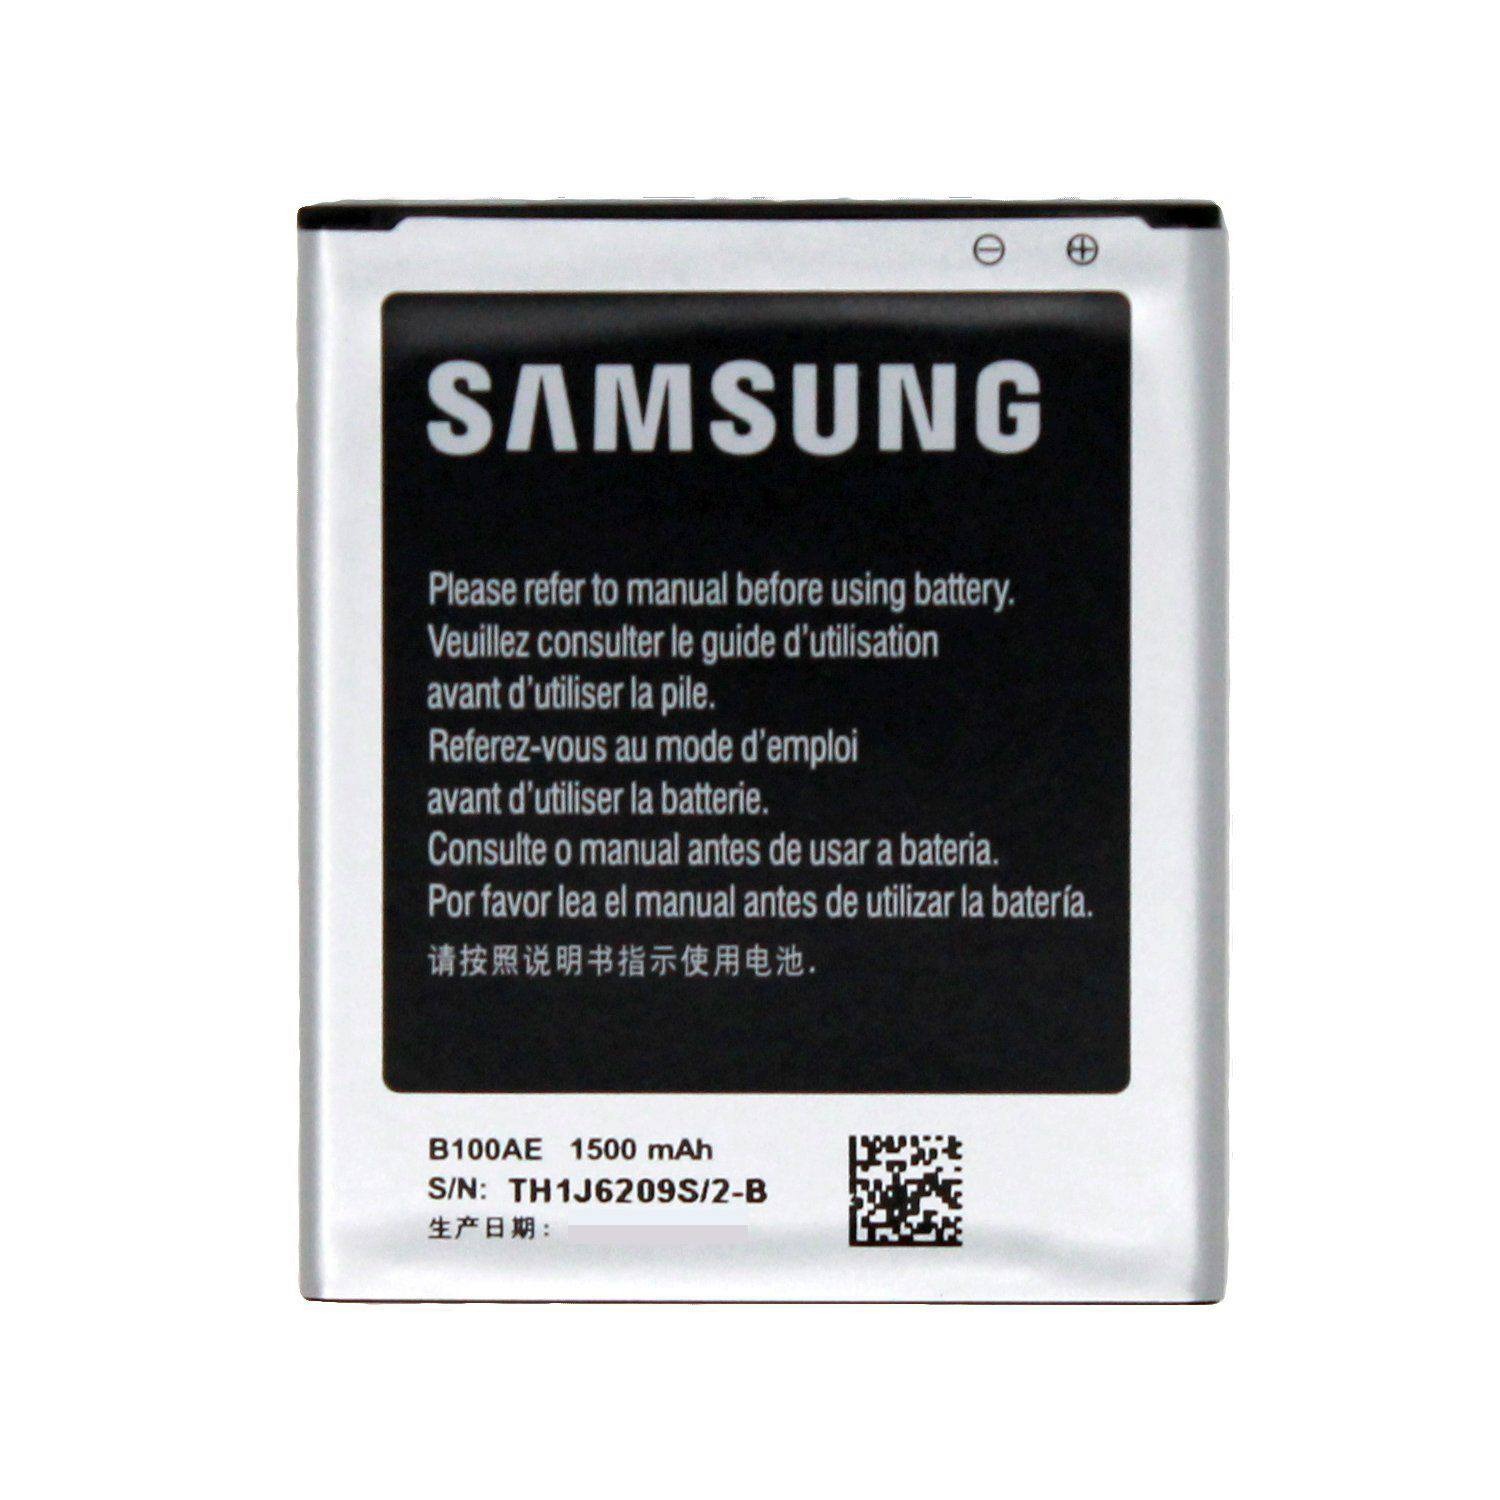 OEM Samsung Galaxy B100AE Battery for S7898 Trend II S7568I Trend S7562C Duos Ace 3